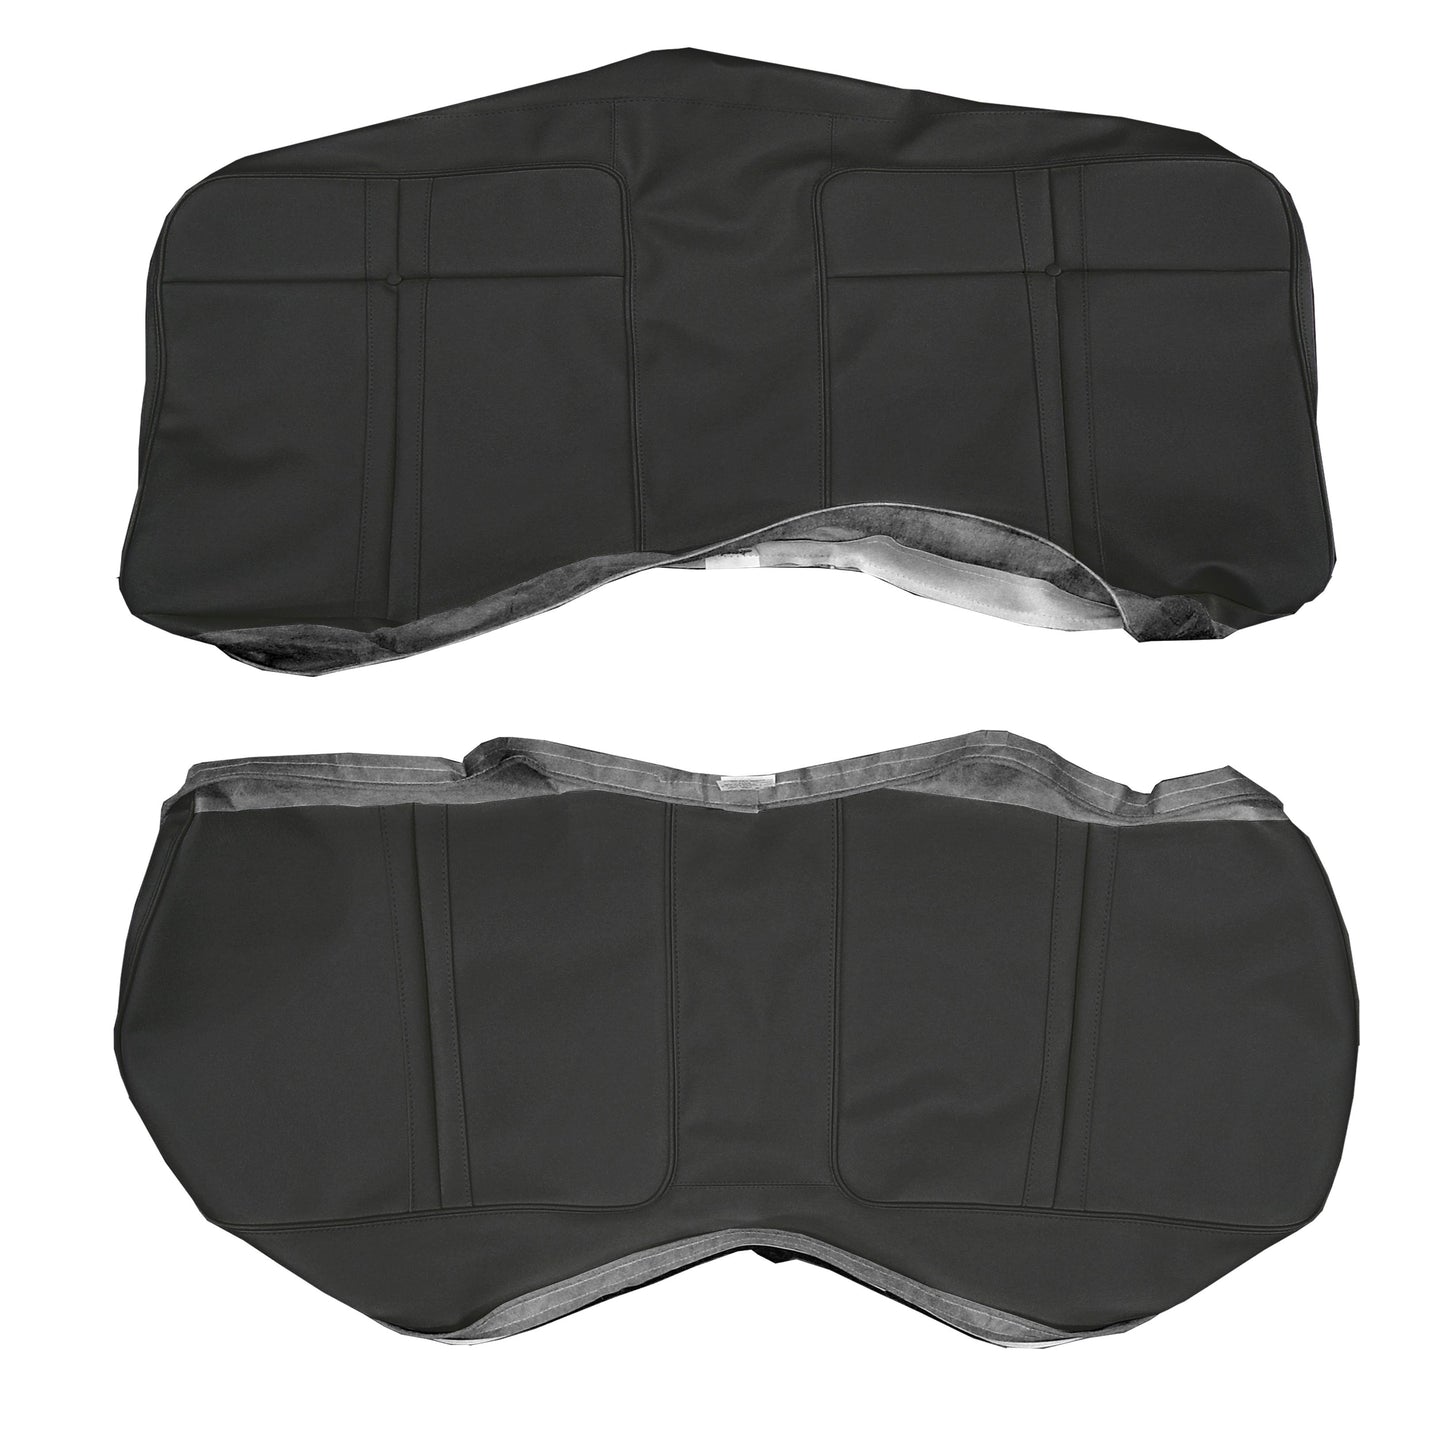 71 BARRACUDA/ CHALLENGER REAR UPHOLSTERY - BLACK